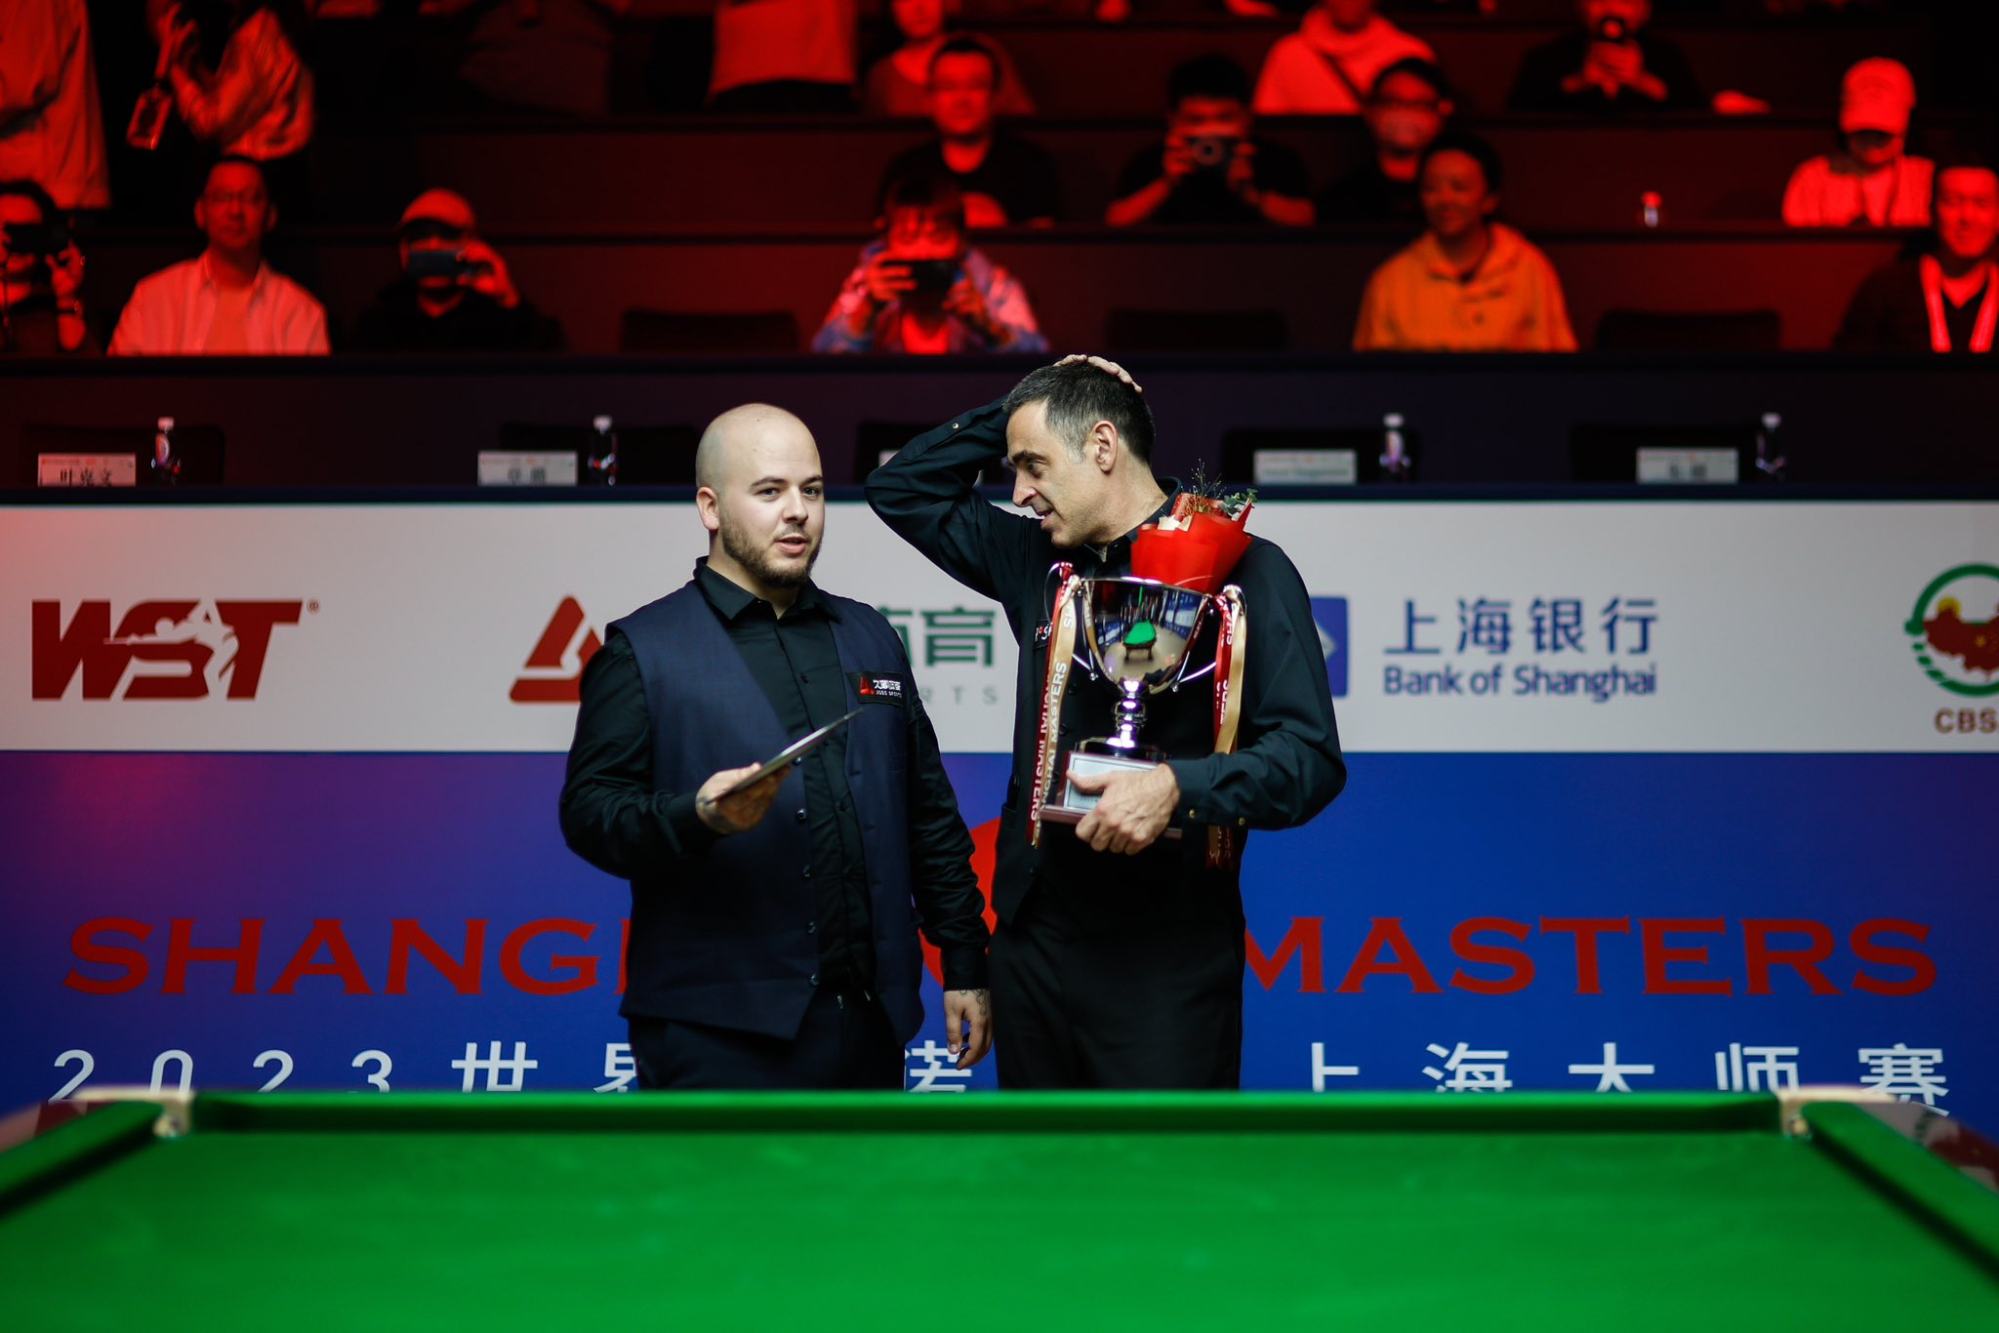 The wrong trousers cost Chinese snooker start Ding Junhui frame in English Open win South China Morning Post